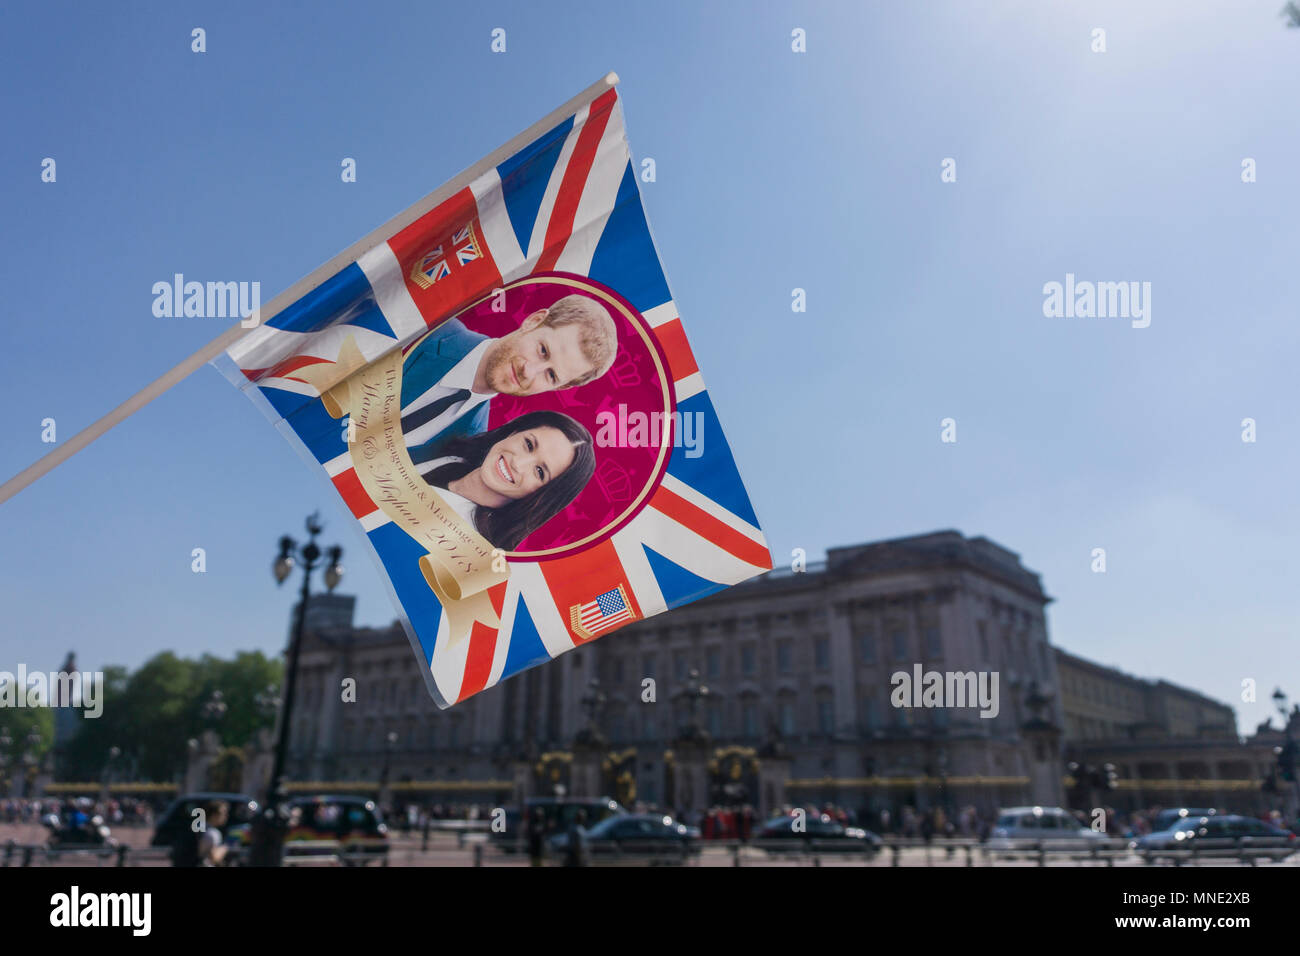 London, UK. 15th May 2018. Union jack flag with Prince Harry and Meghan Markle on is waved outside Buckingham palace before the Royal Wedding takes place in Windsor Credit: Ink Drop/Alamy Live News Stock Photo